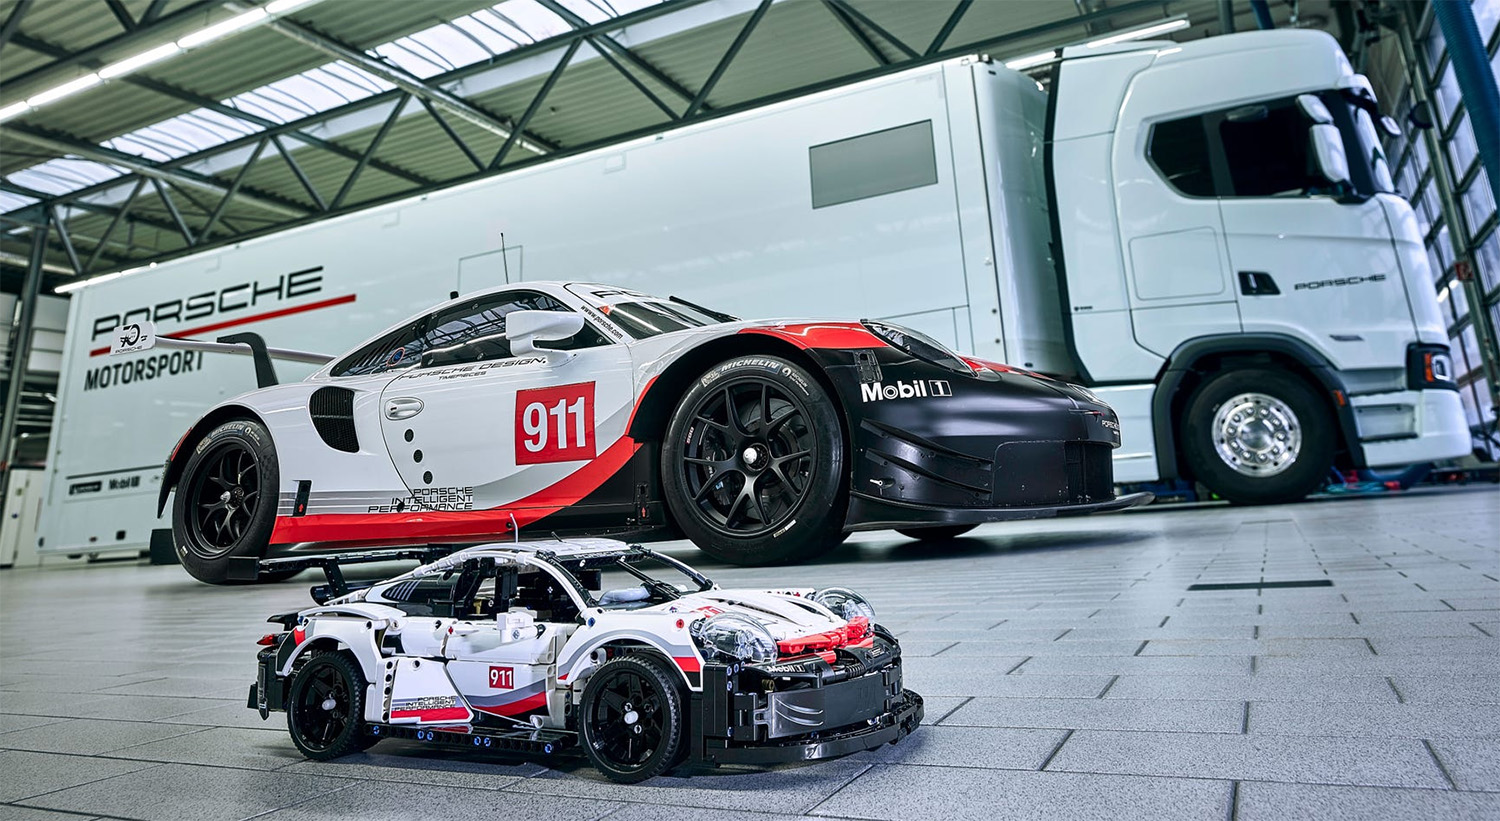 Build Your Dream Car With This LEGO Technic 911 RSR